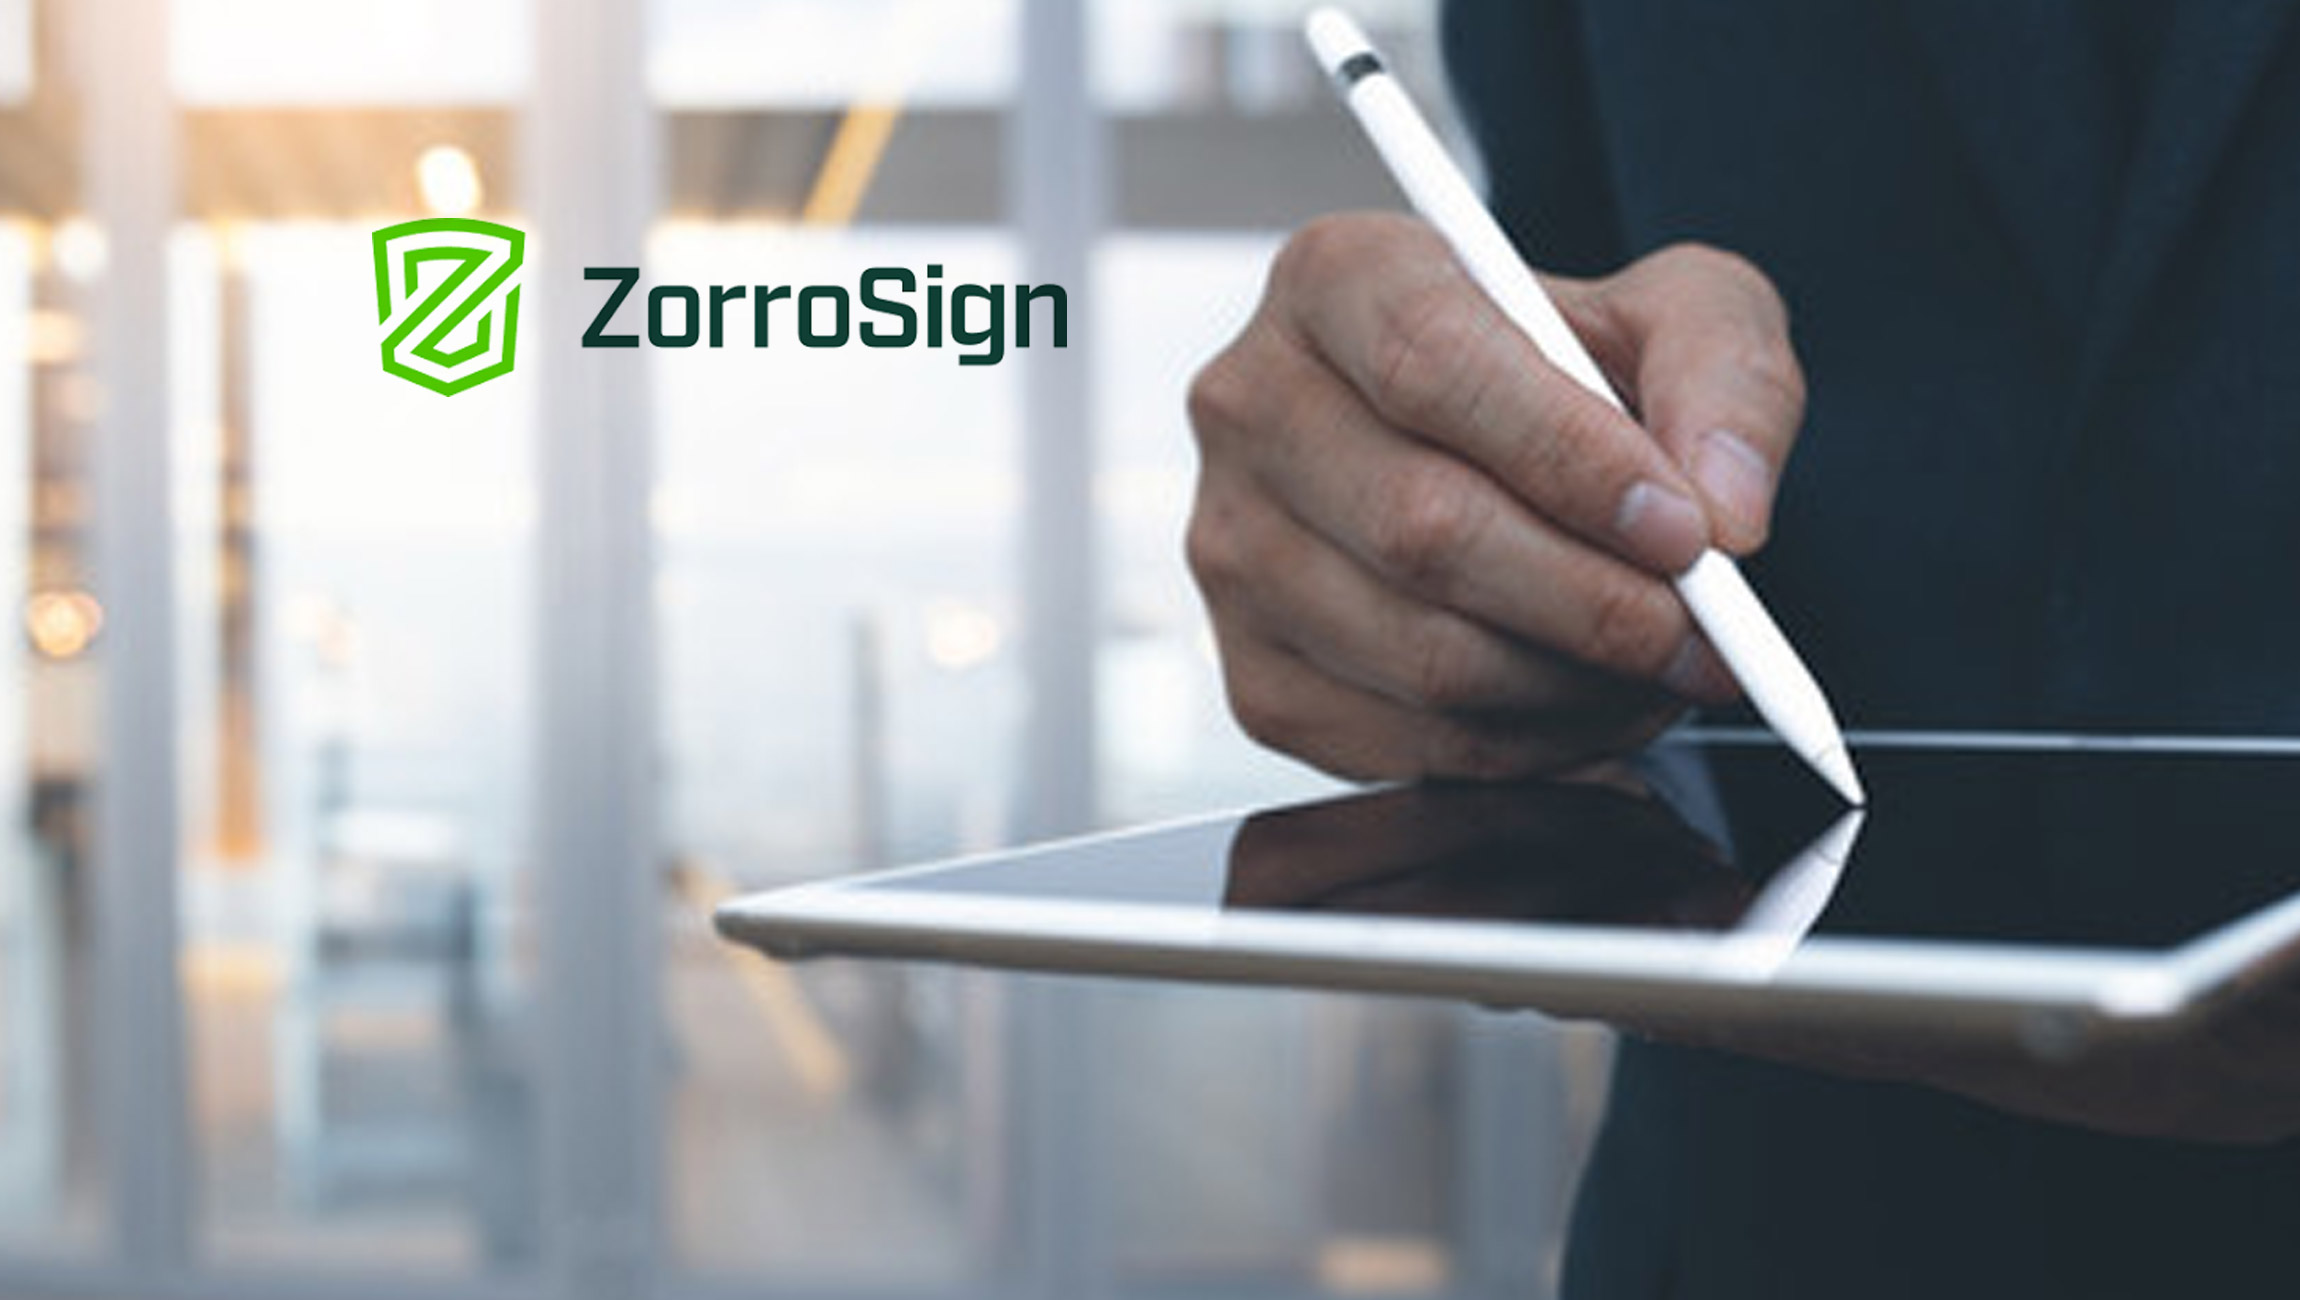 ZorroSign Opens Office at Thunderbird School of Global Management at Arizona State University